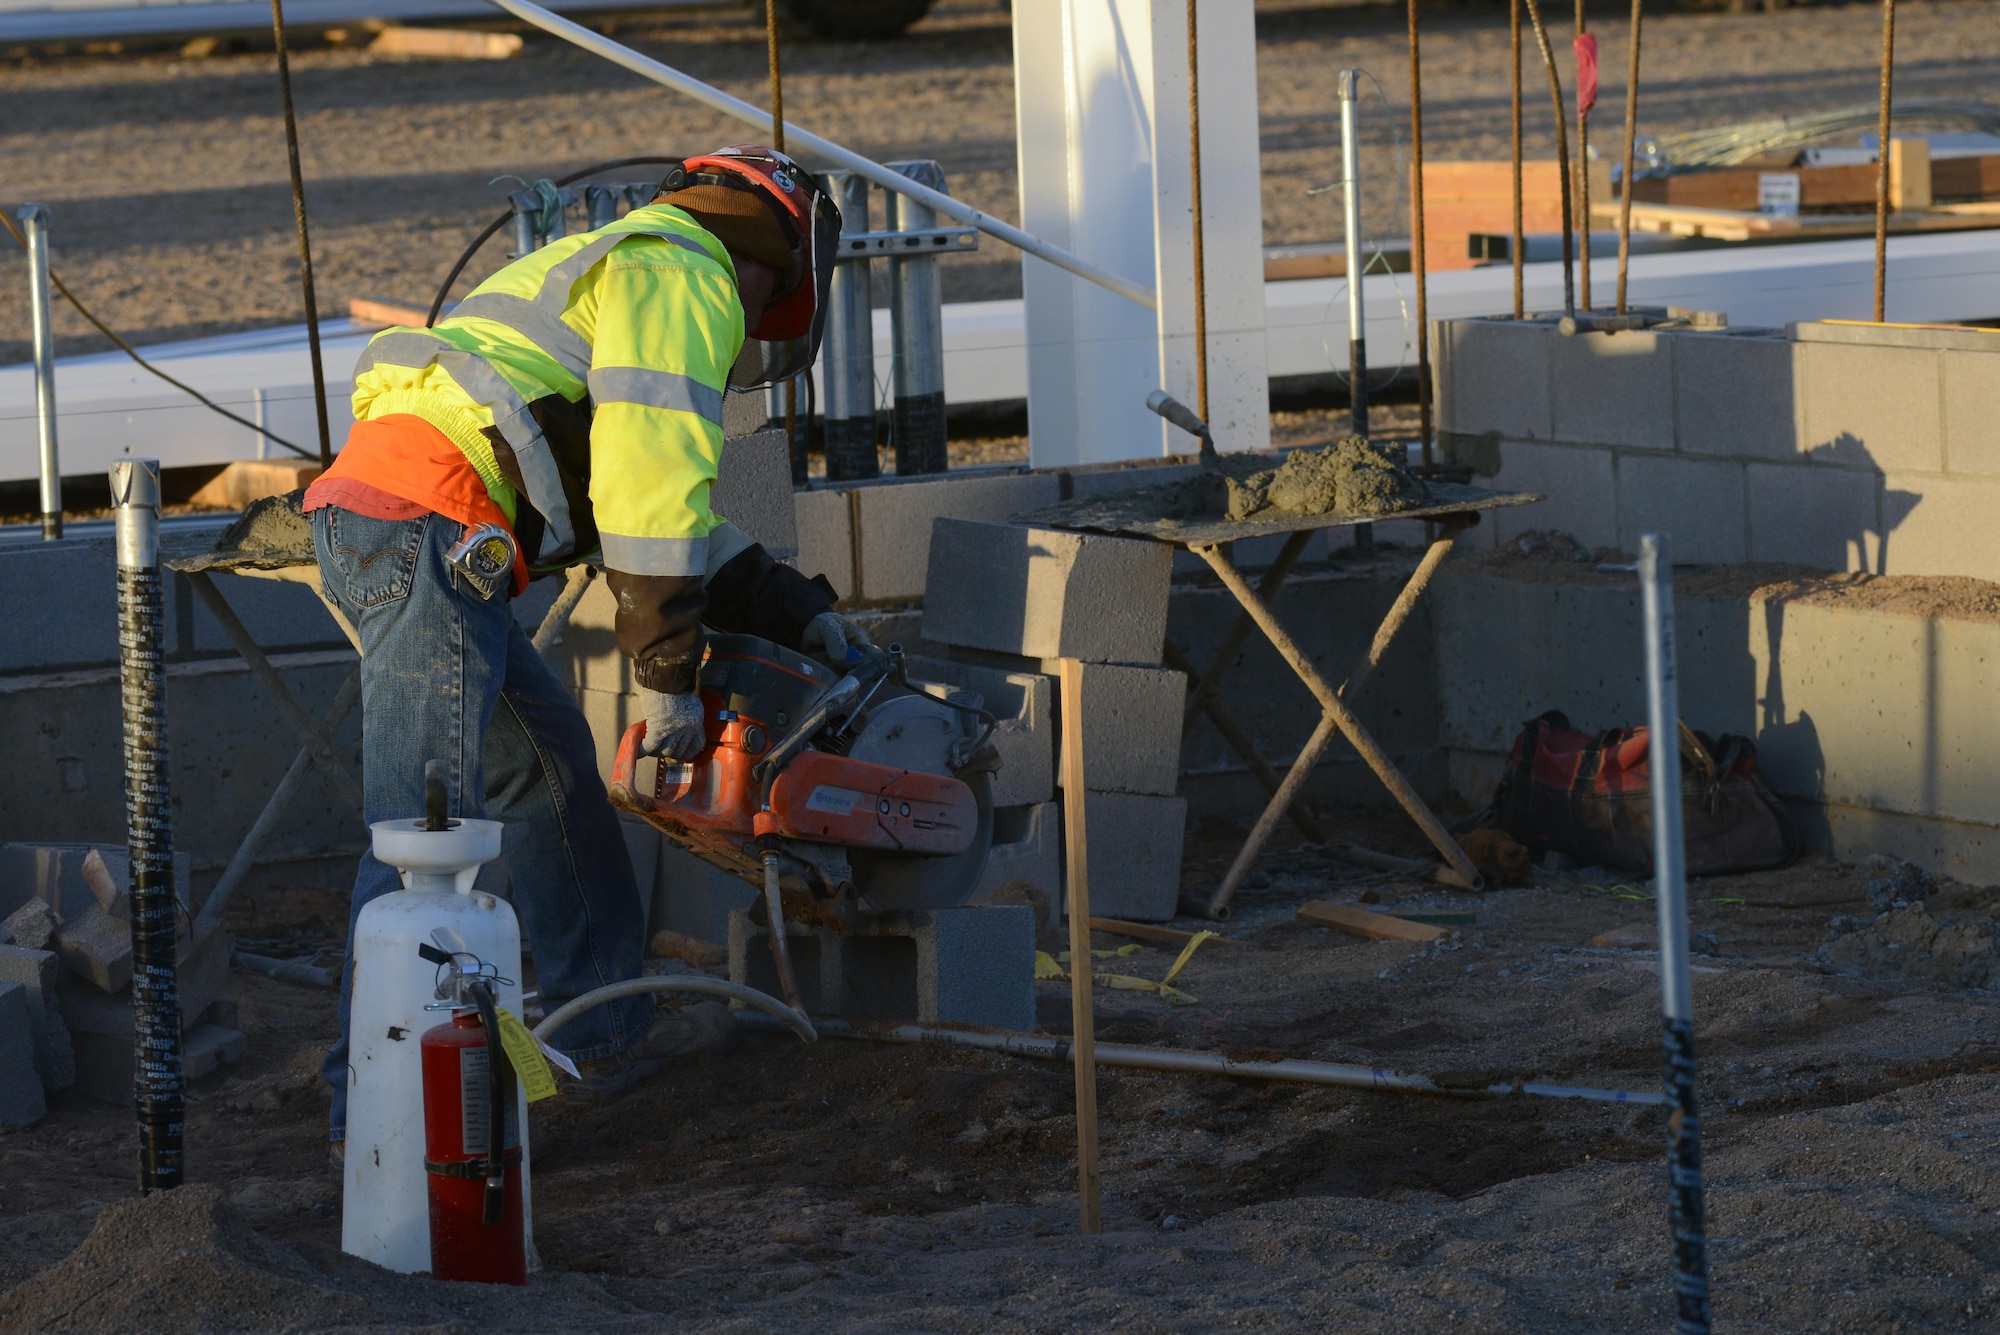 A 56th Civil Engineering Squadron general contractor cuts a concrete block for a wall corner piece Dec. 8, 2016, at Luke Air Force Base, Ariz. The building section of the hanger will contain a pad for the aircraft cooling unit and house an electrical room. (U.S. Air Force photo by Airman 1st Class Pedro Mota)